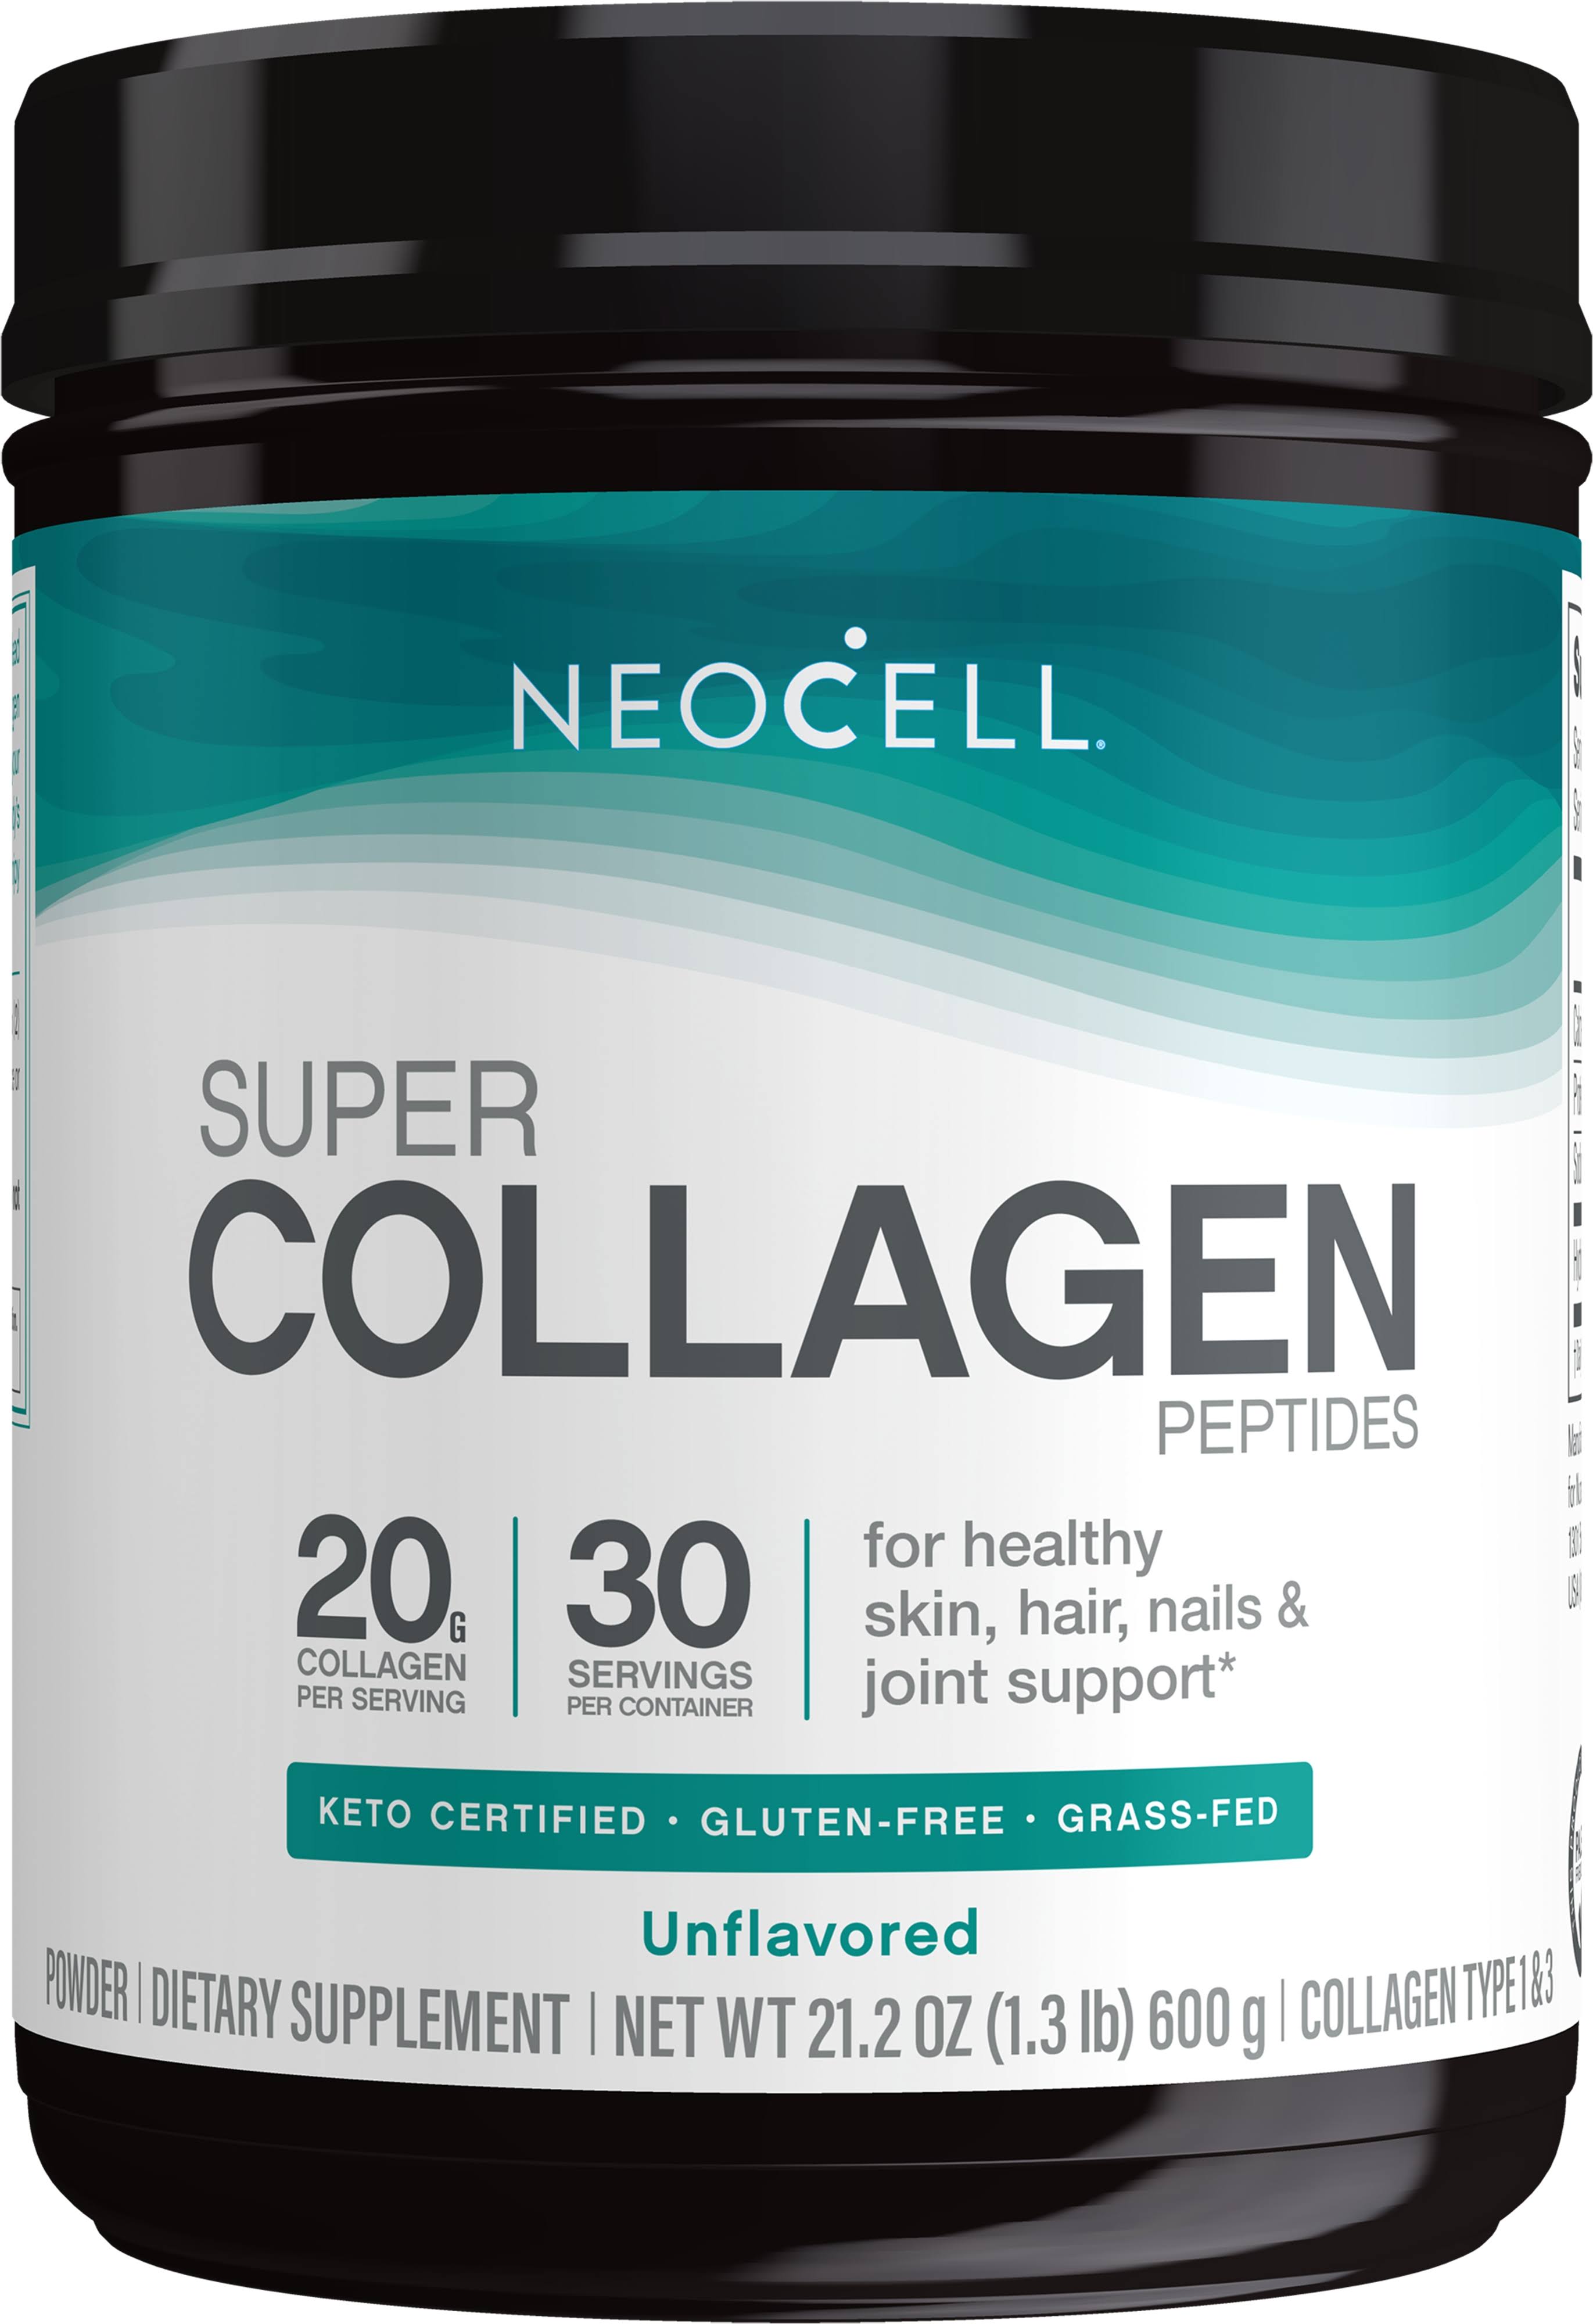 NeoCell Super Collagen Peptides Unflavored 21.2 oz